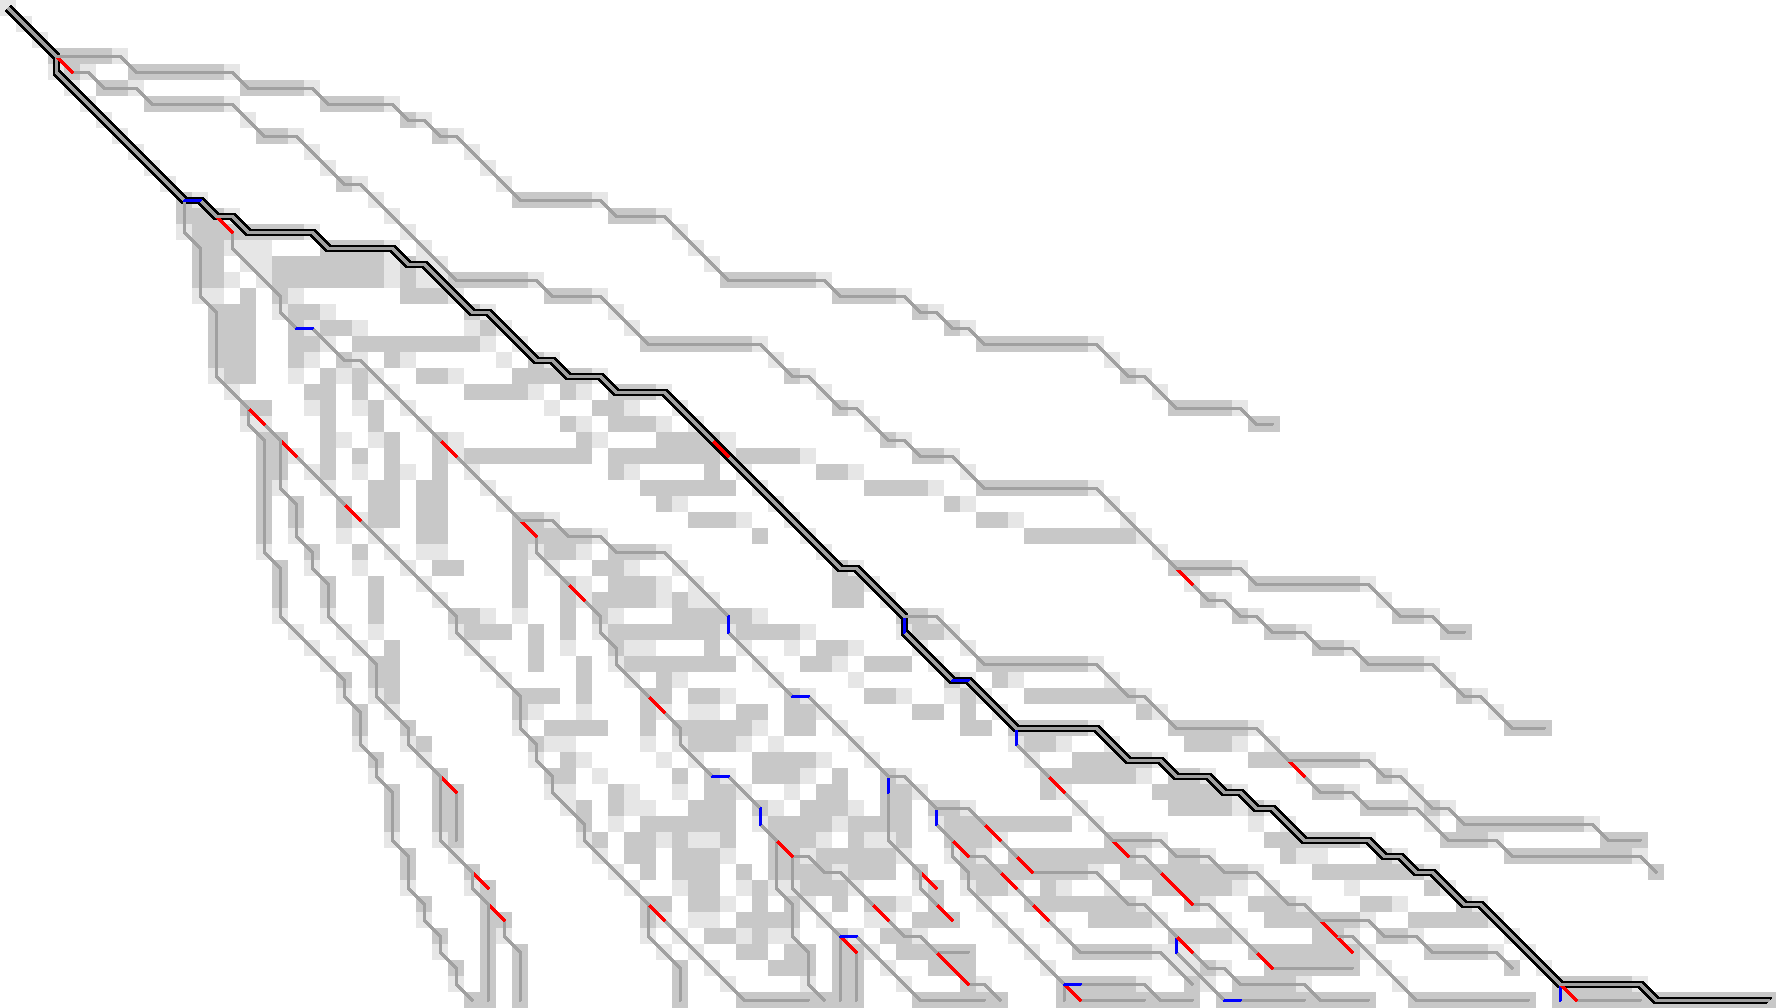 Figure 13: We additionally store indel edges when the path changes the direction of the change of diagonals. These additional edges are shown in blue. In total, for this sample we need to store around 50 parent states to have enough information to reconstruct all tracebacks.